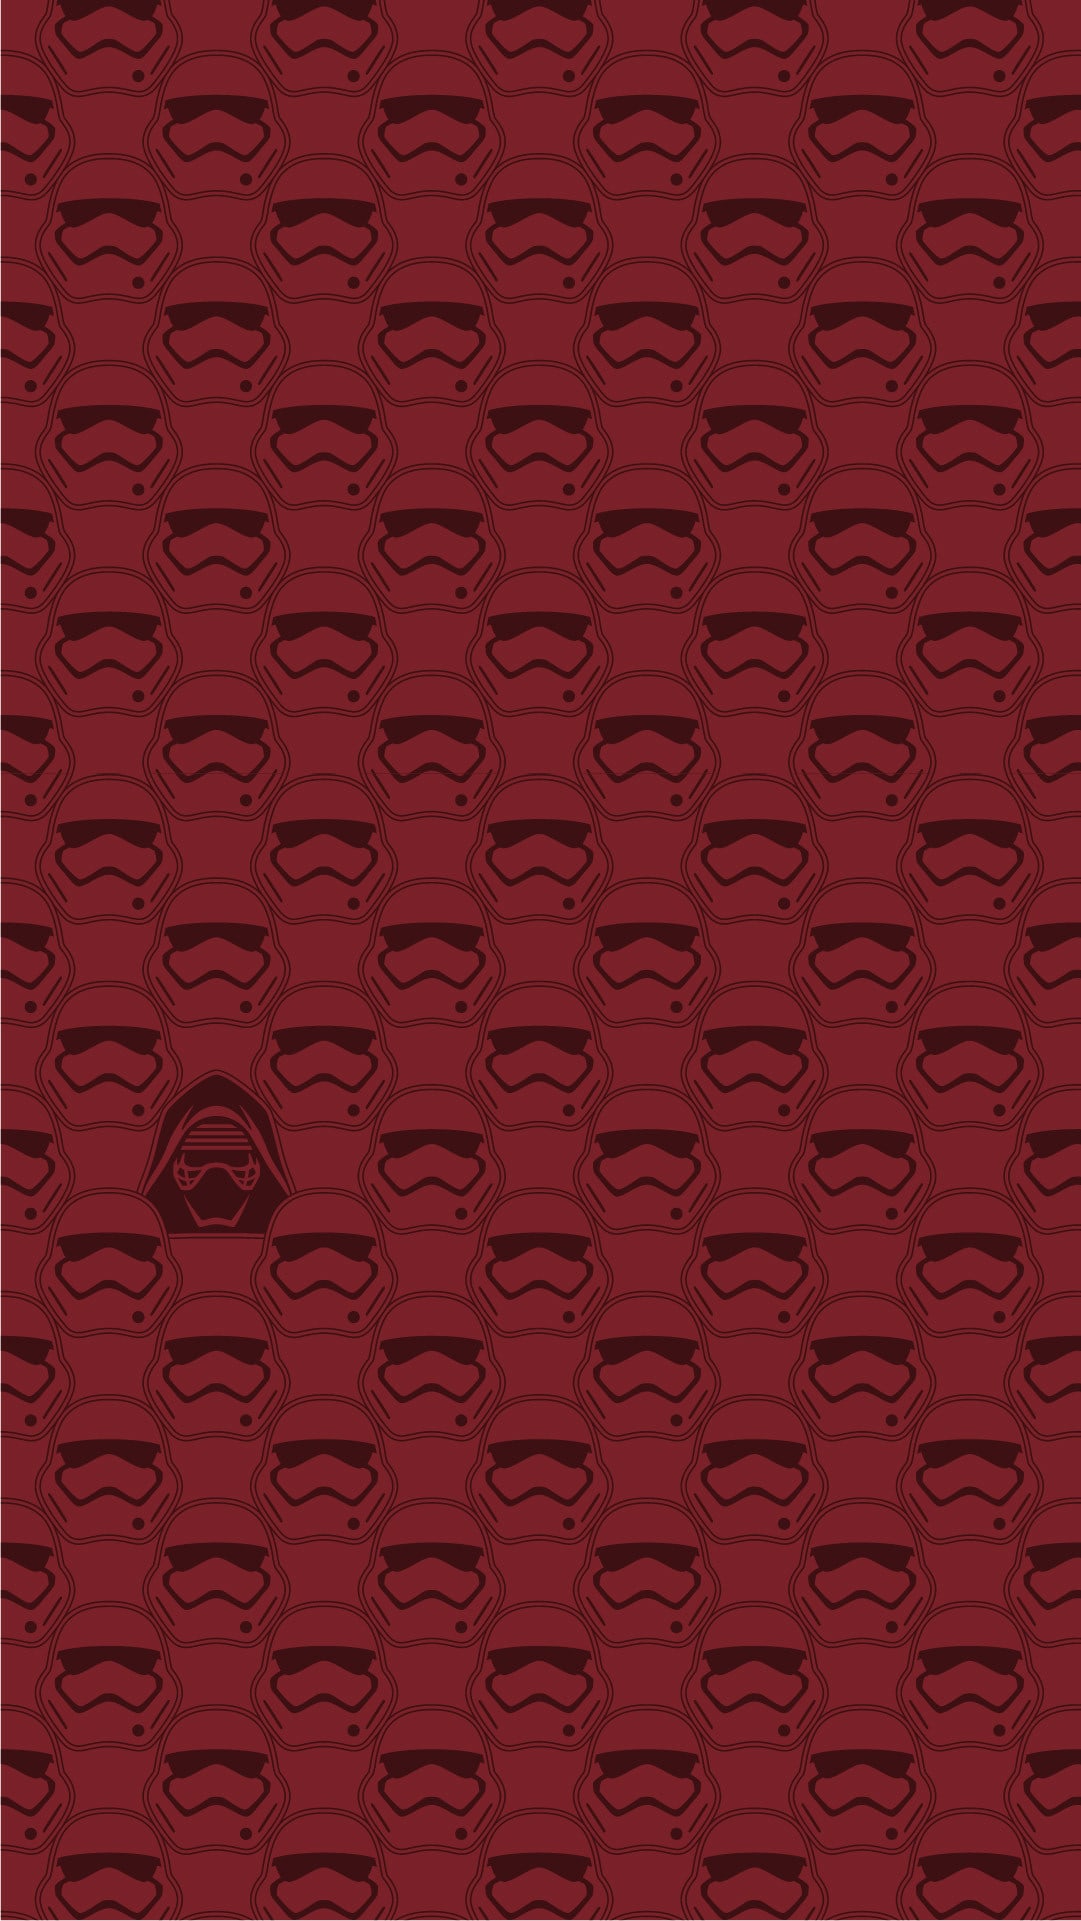 A wallpaper with Stormtrooper helmets from the Star Wars franchise - Star Wars